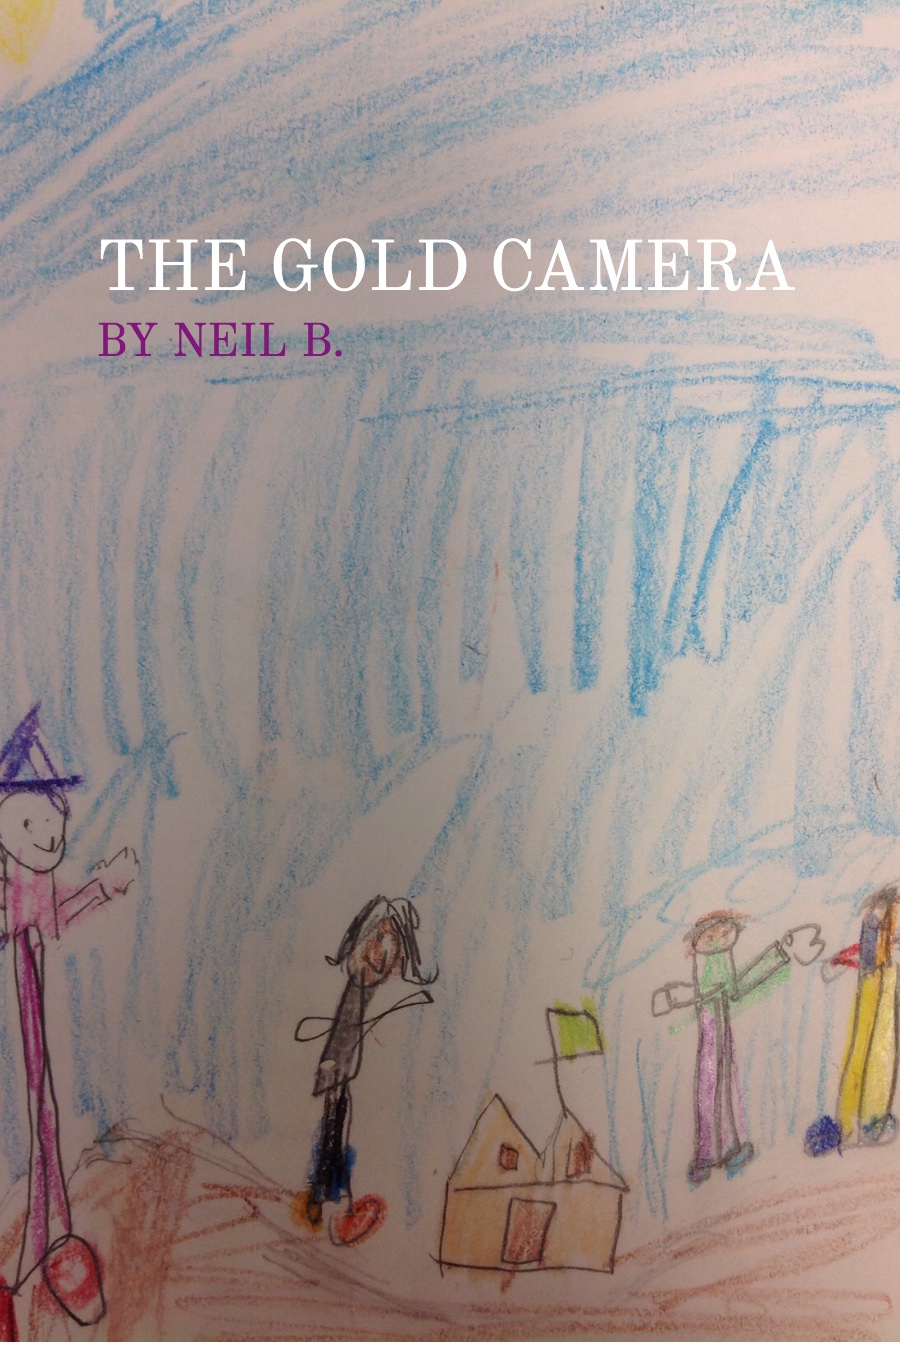 The Gold Camera by Neil B